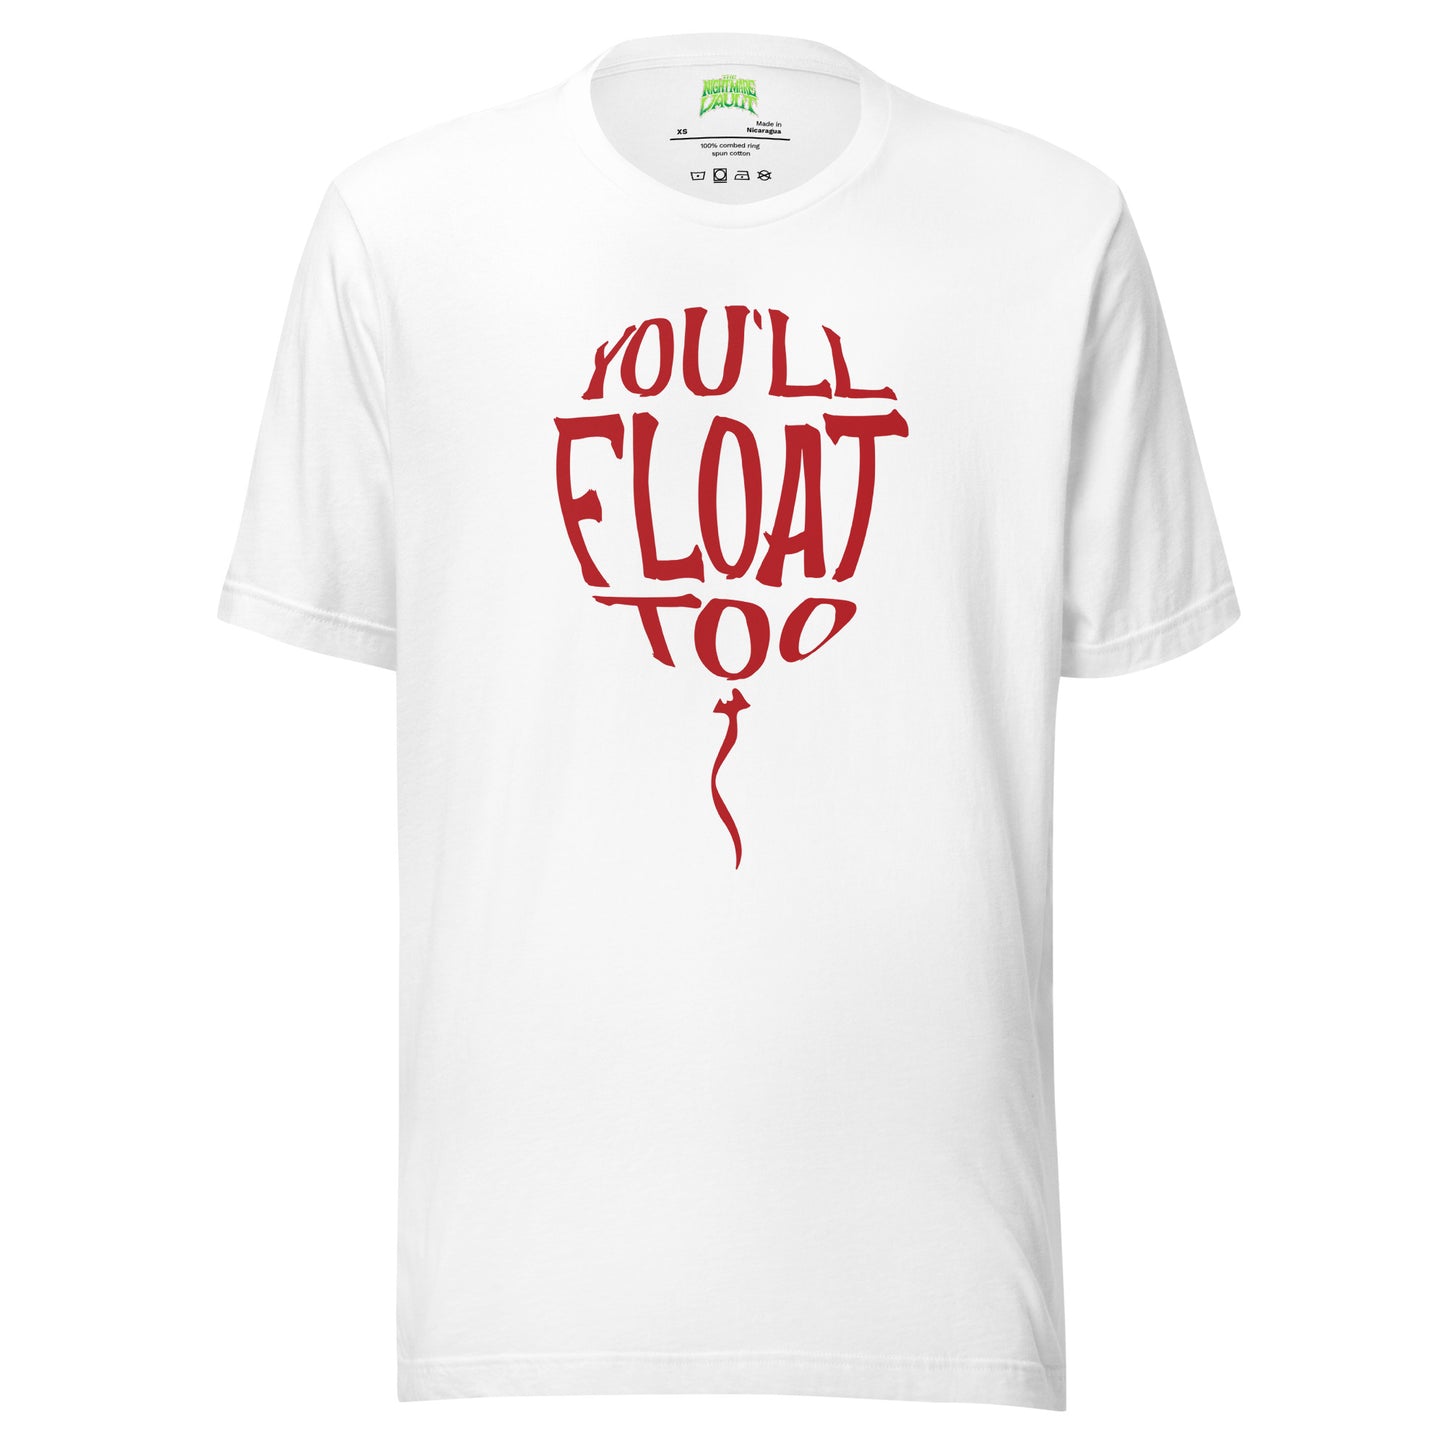 You'll Float Too tee